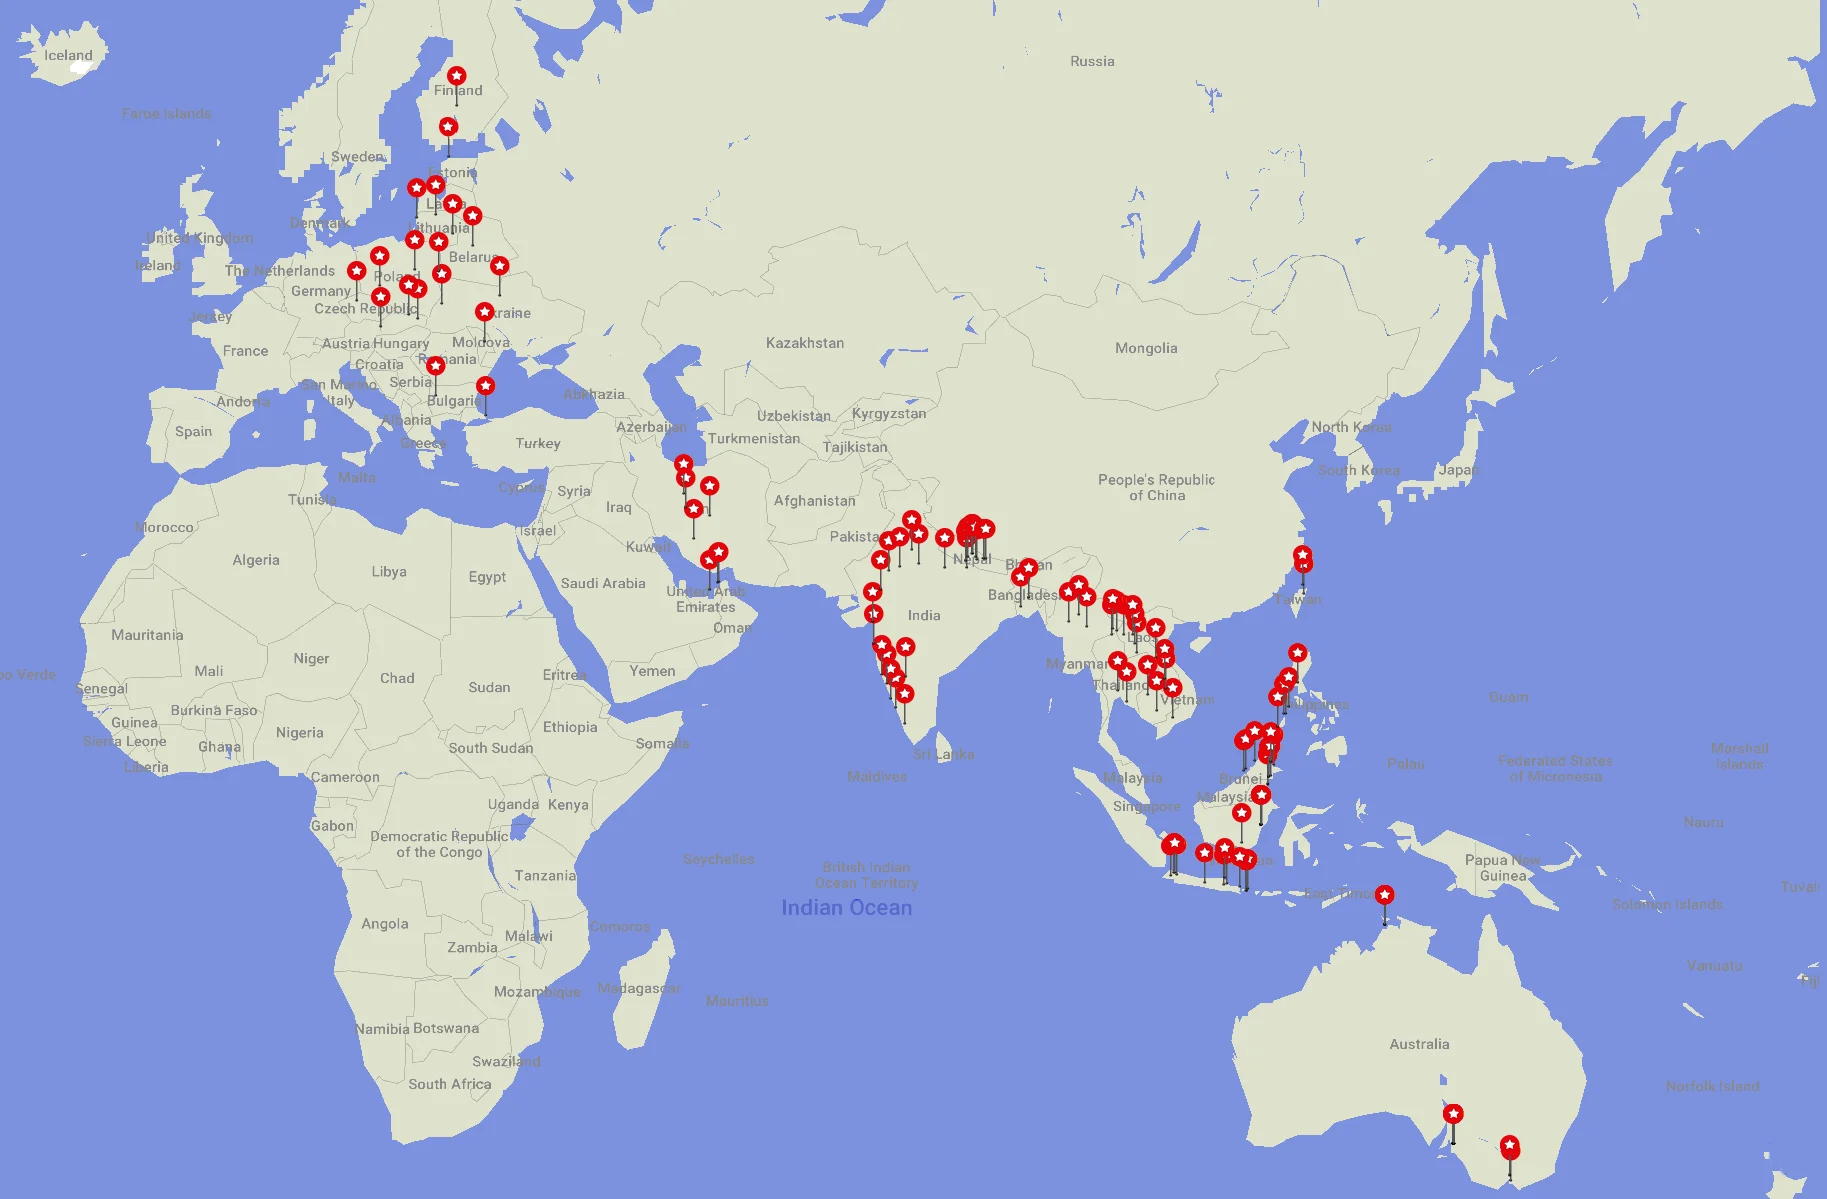 365 Days on the Road. My stops on the first year of a RTW trip.